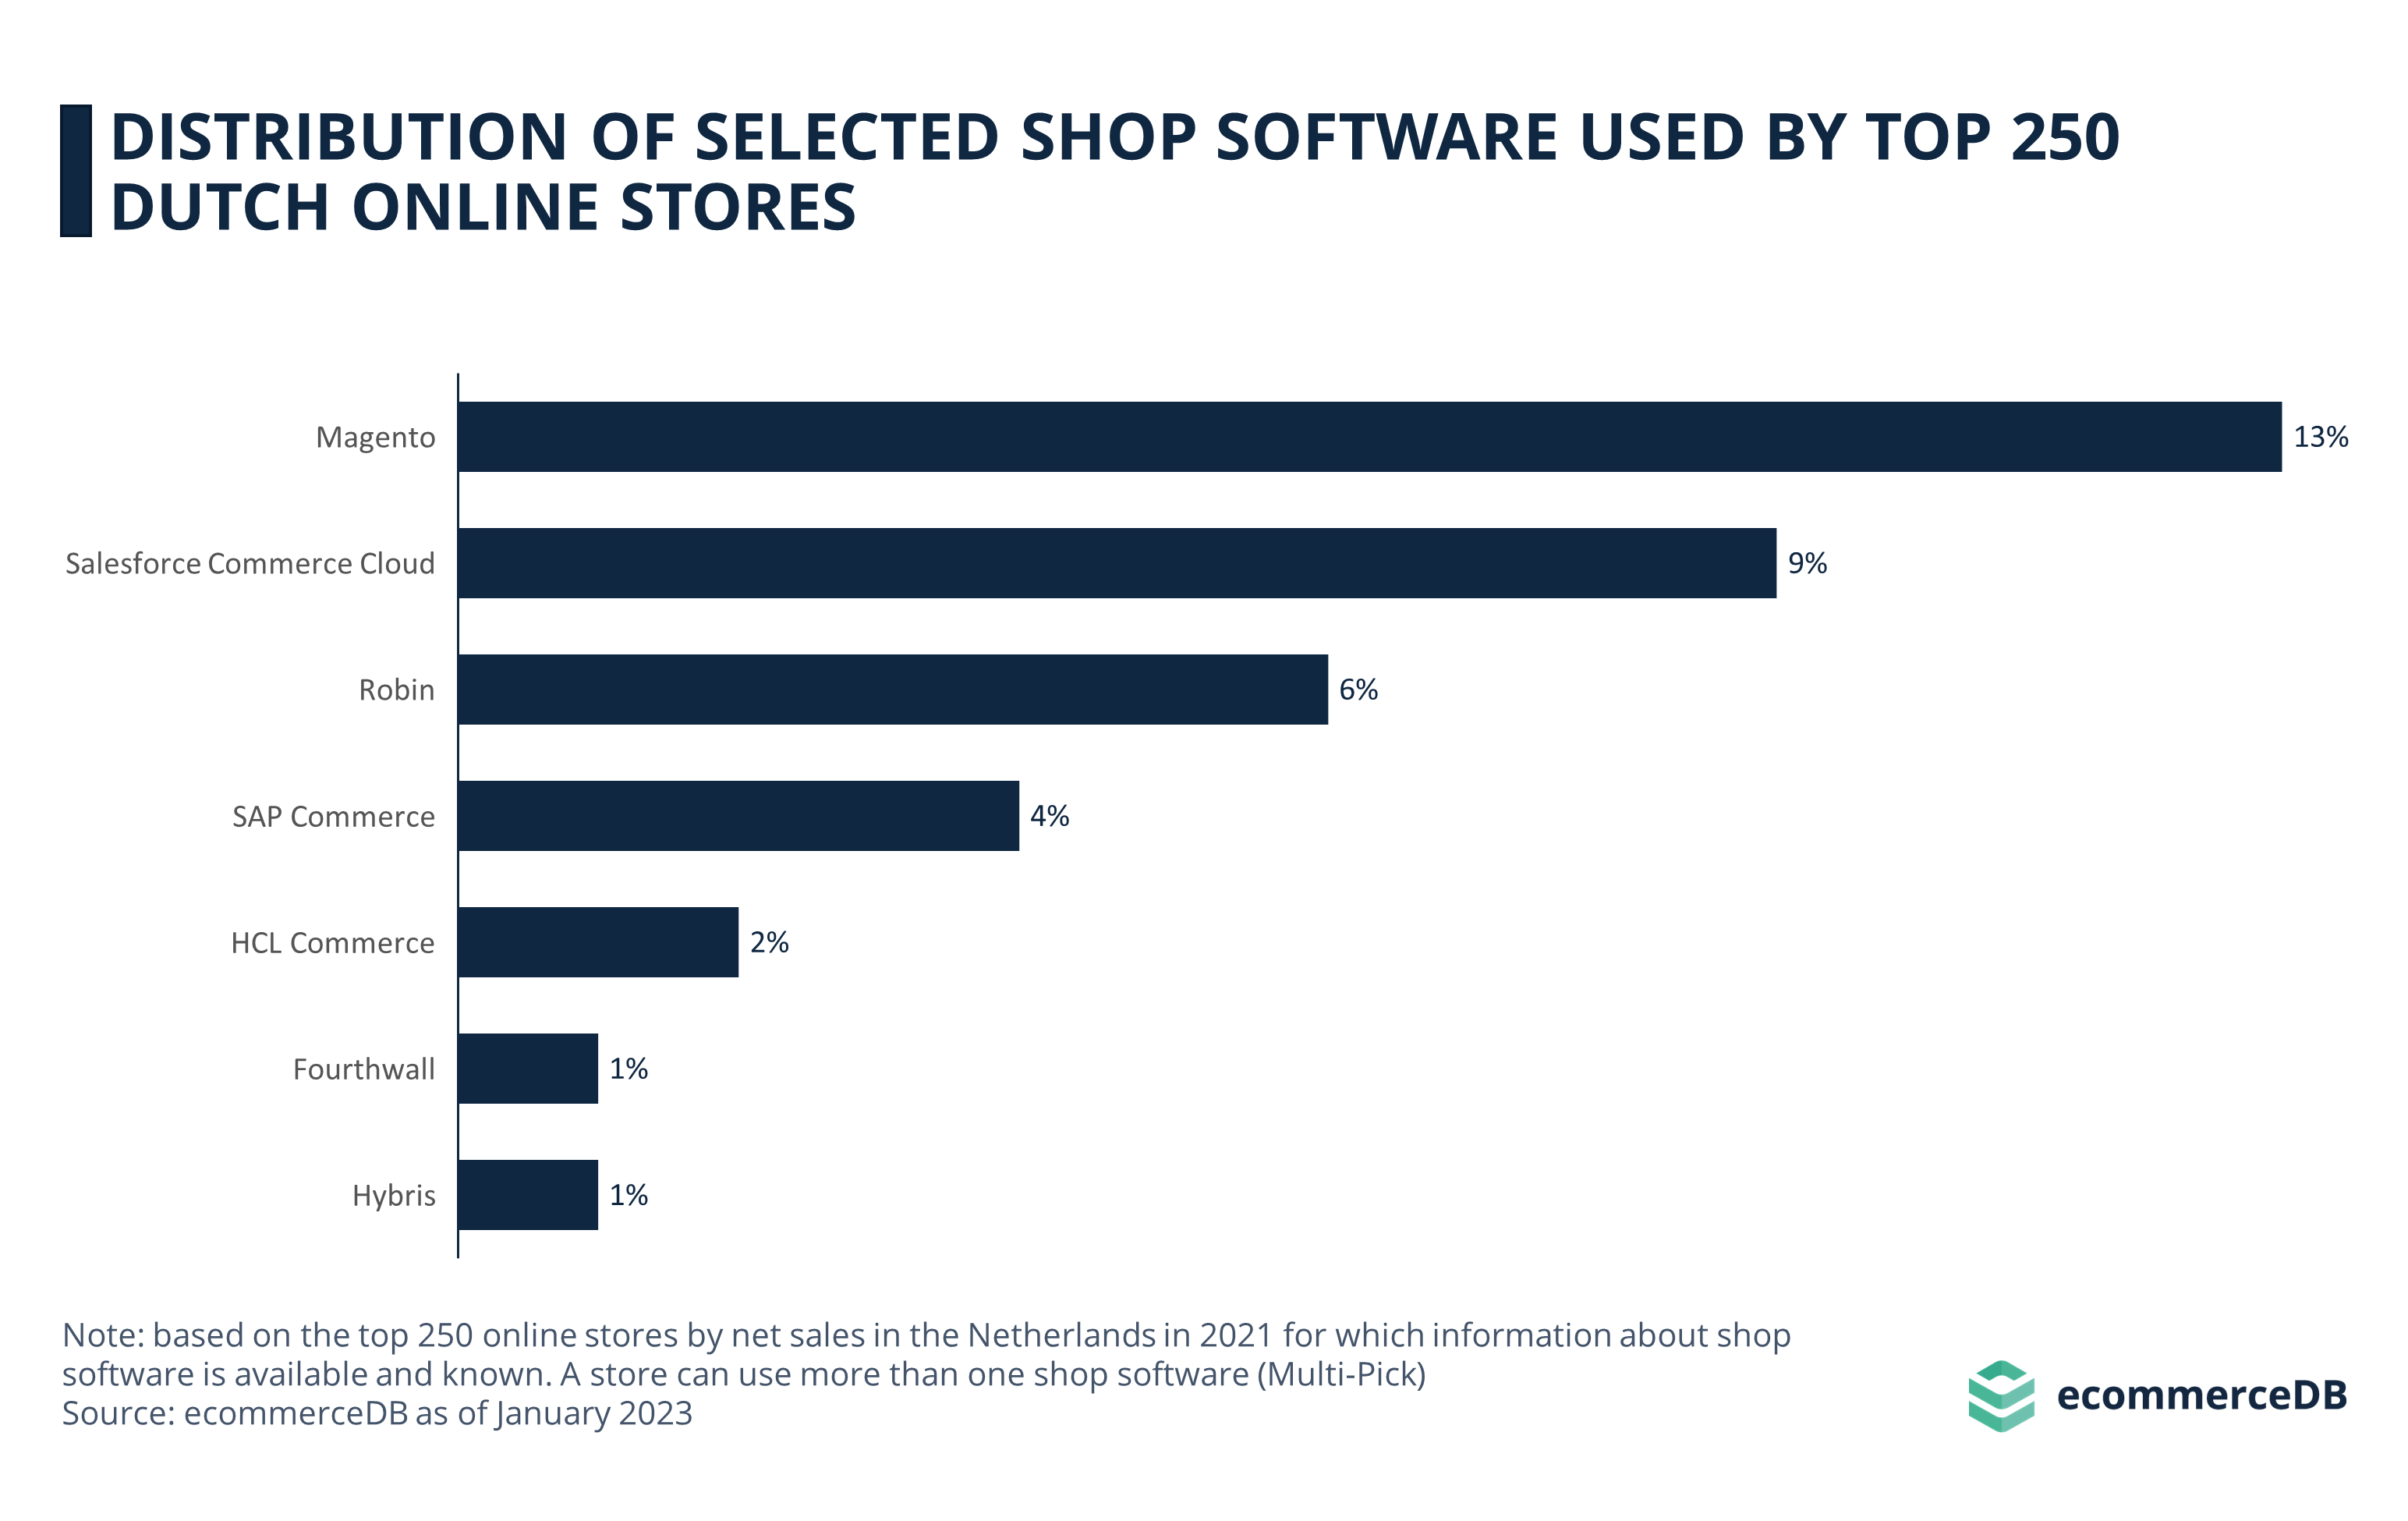 Distribution of Selected Shop Software Used by Top 250 Dutch Online Stores